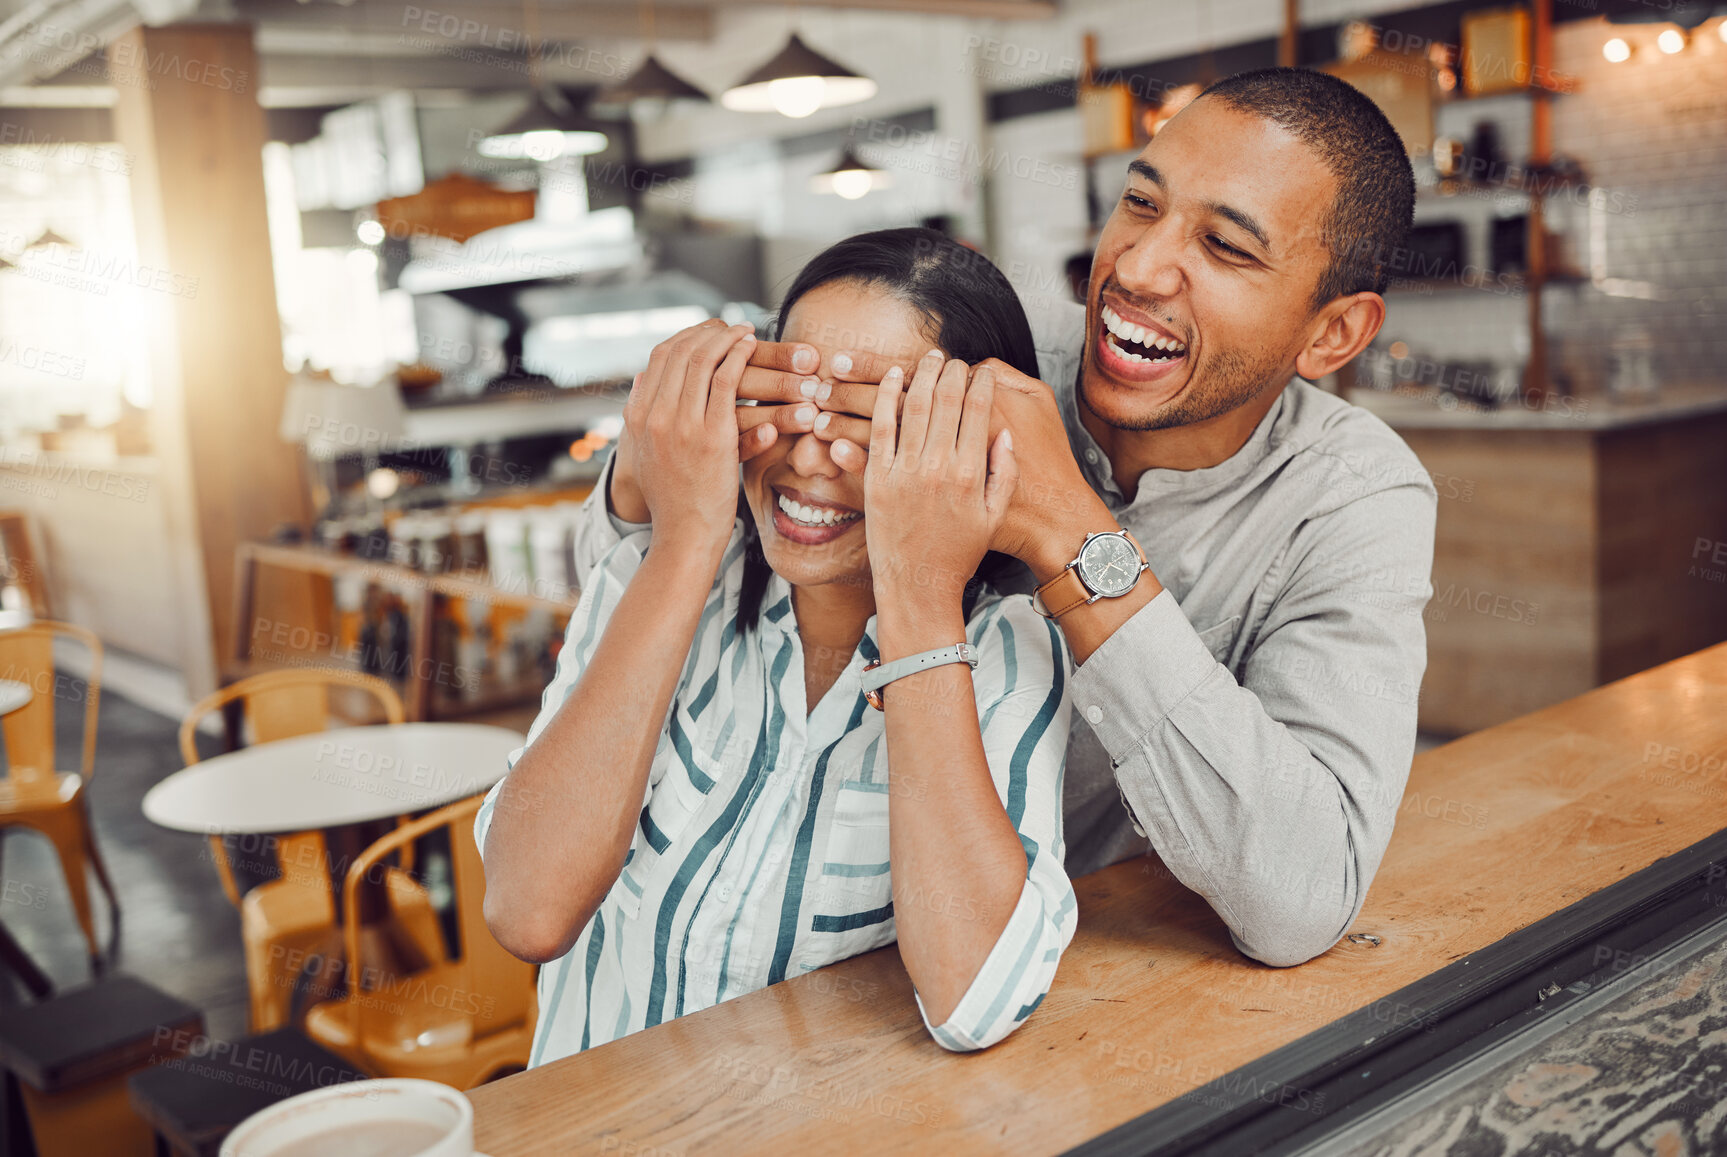 Buy stock photo Cheerful young man covering his girlfriends eyes and surprising her while sitting in a cafe. Happy young mixed race couple meeting for coffee on their first date. Excited woman trying to guess who is behind her